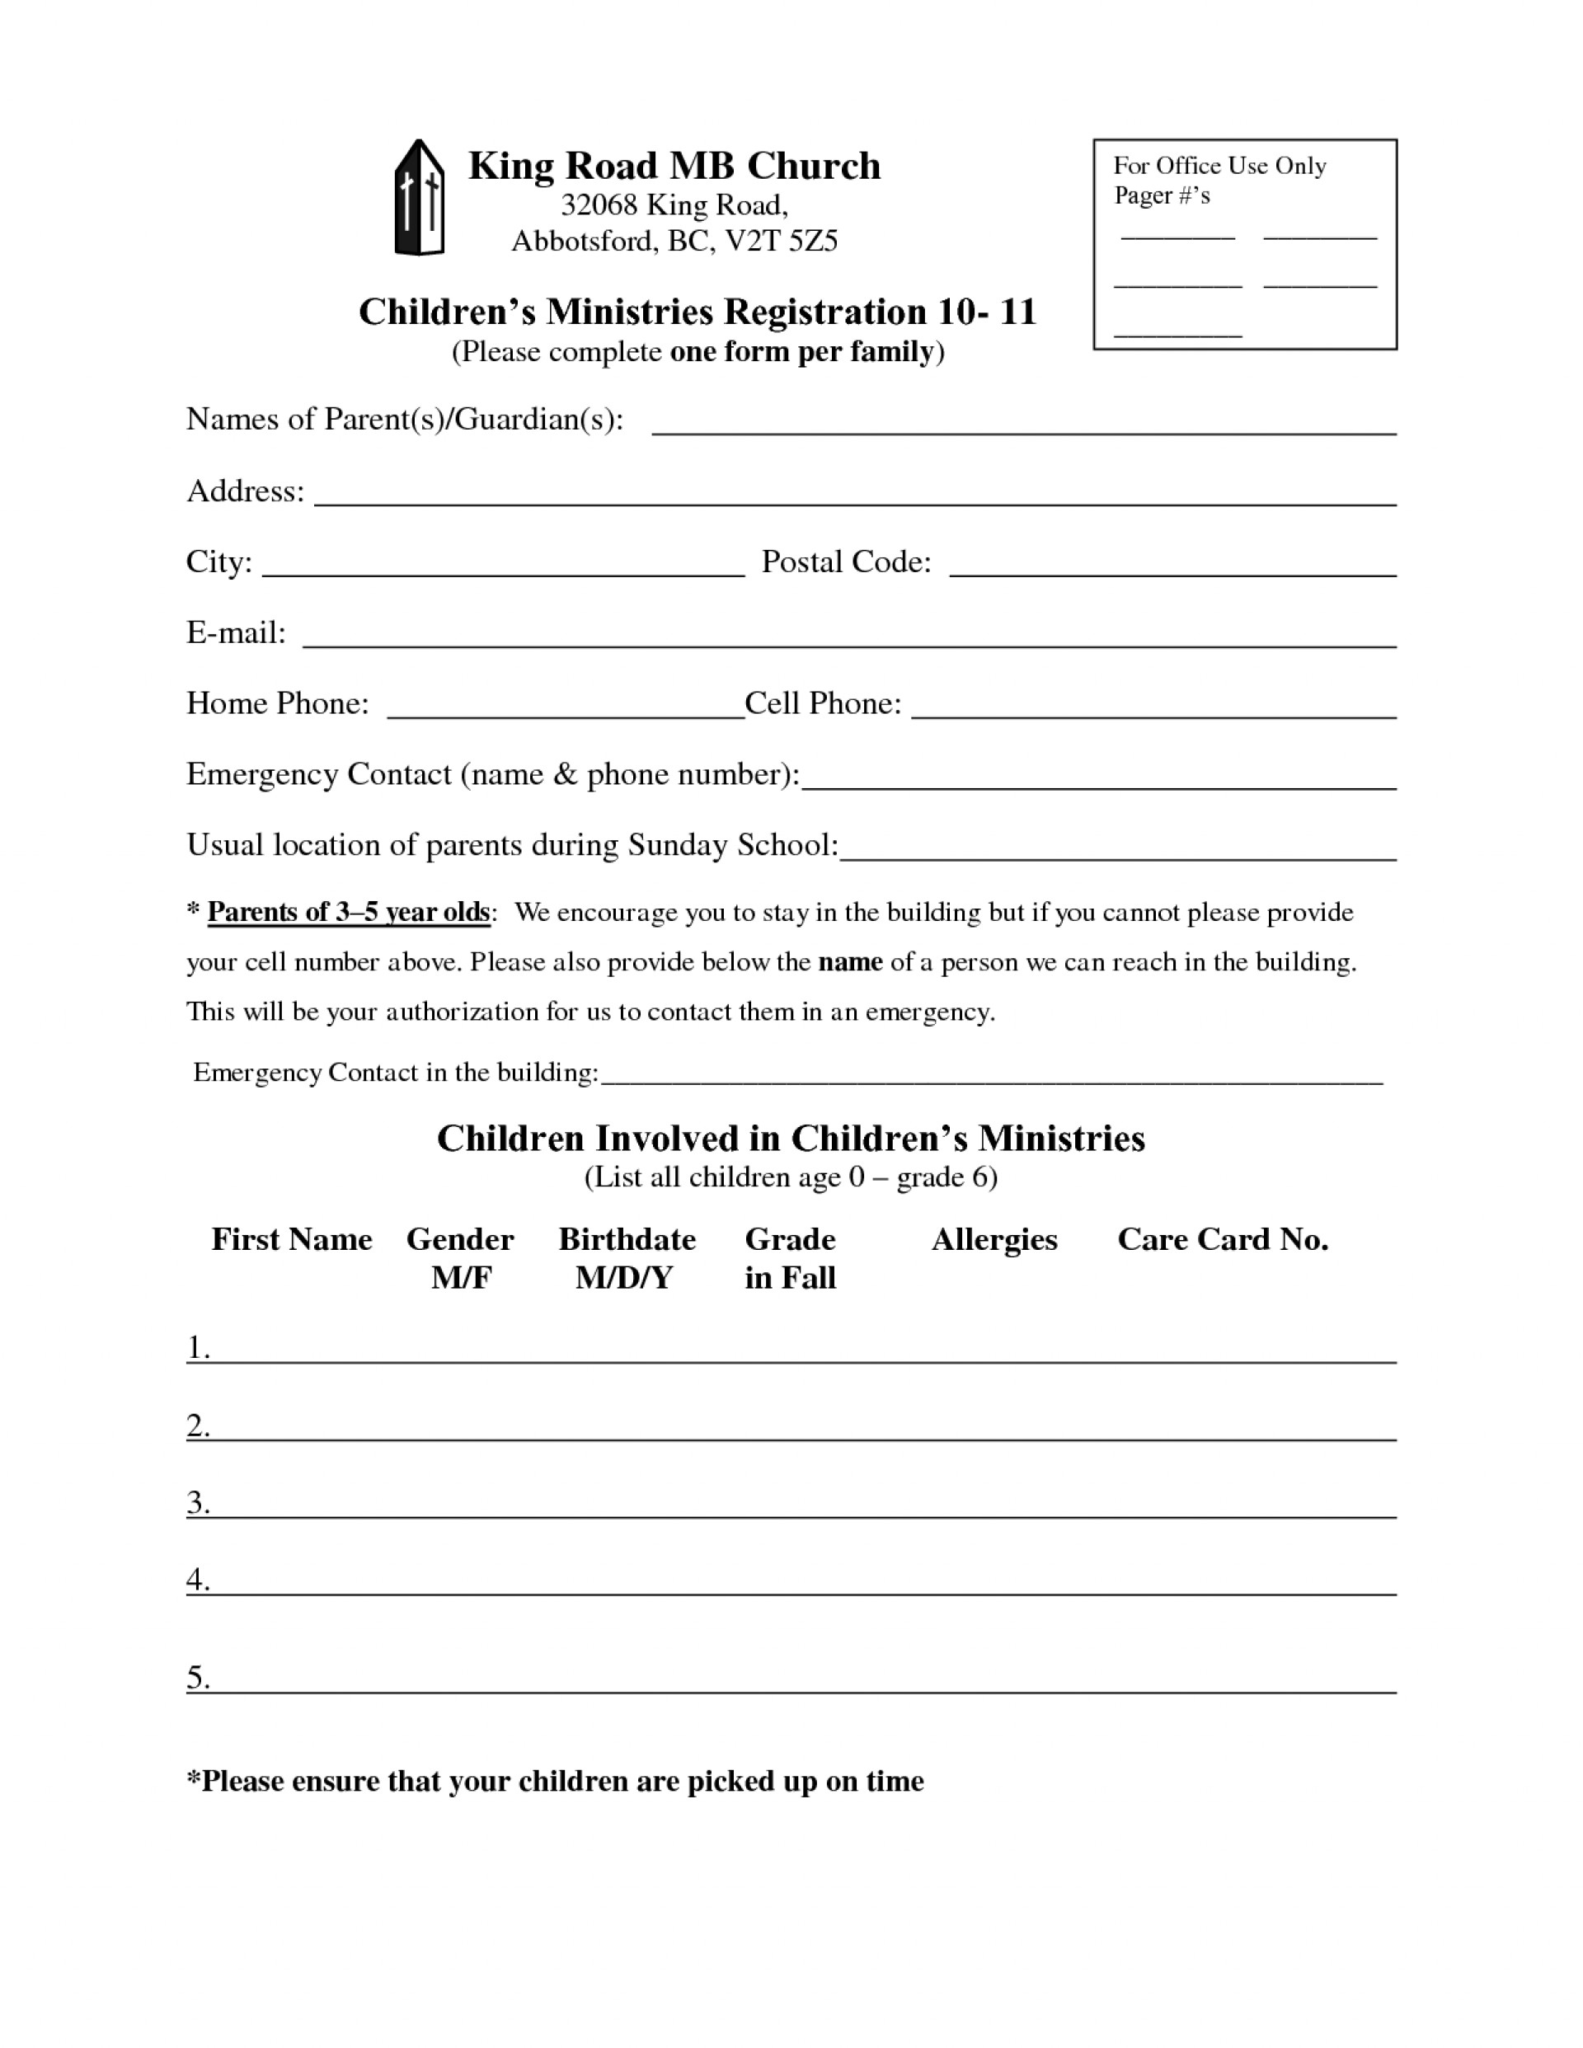 Printable Church Visitor Card Template